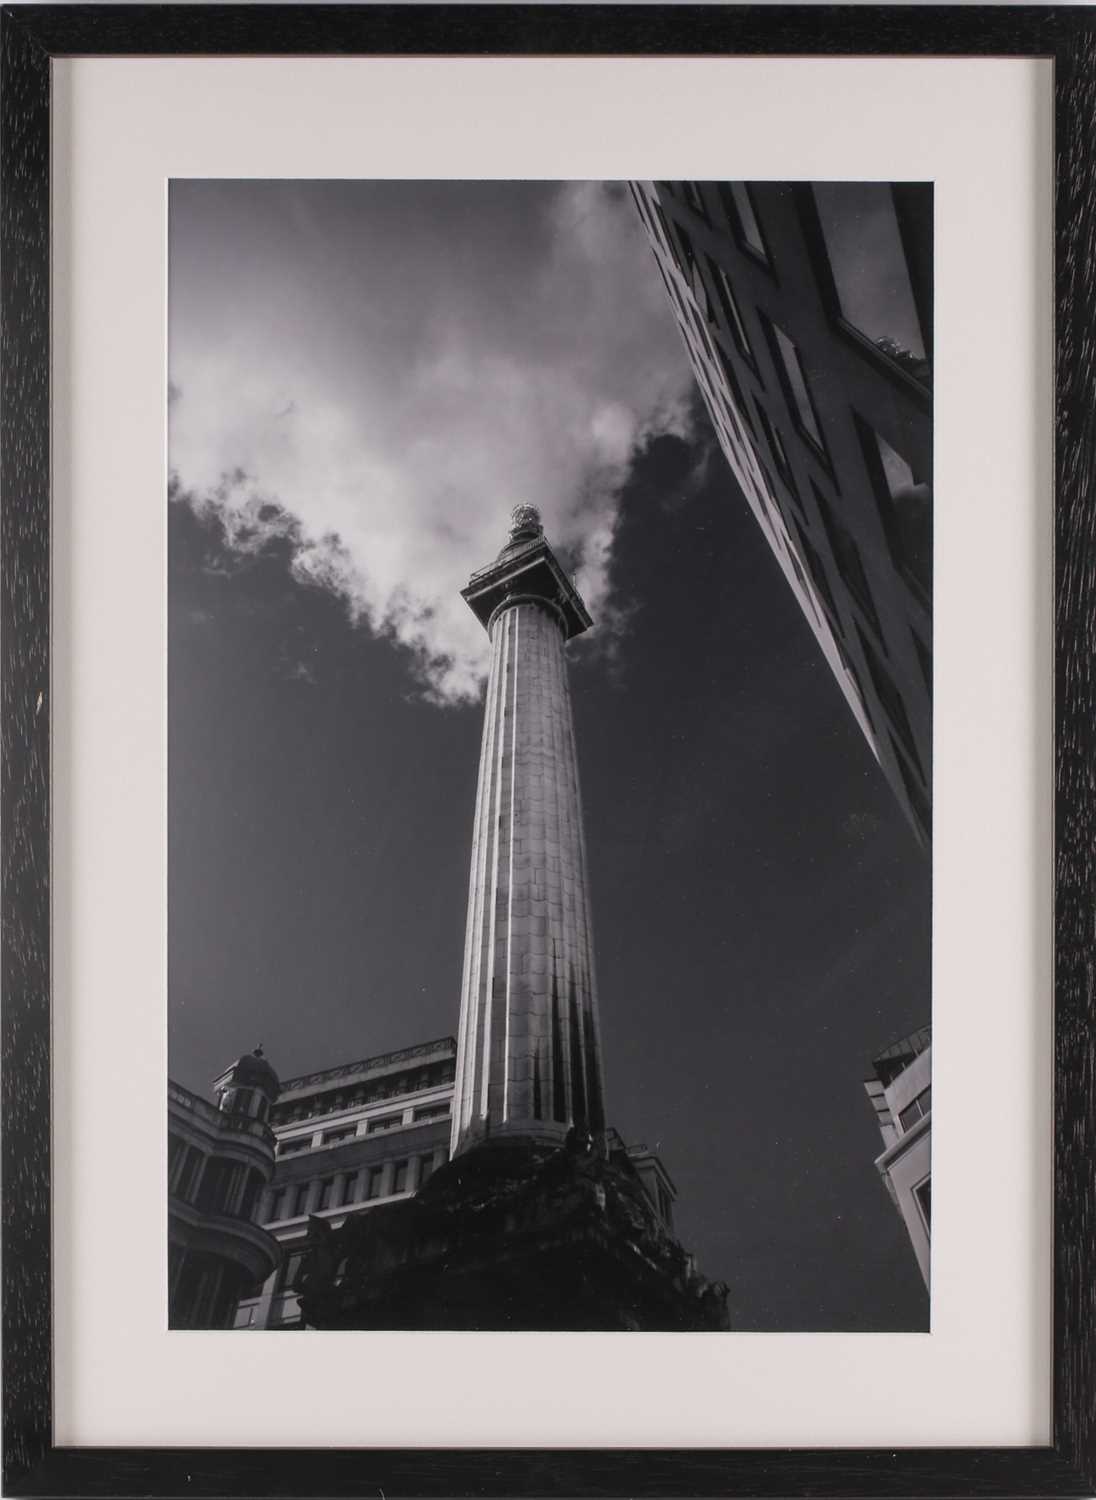 Steve Mayes, Tower Bridge, London, and St Paul's Cathedral, London, photographic prints, a pair, - Image 6 of 11